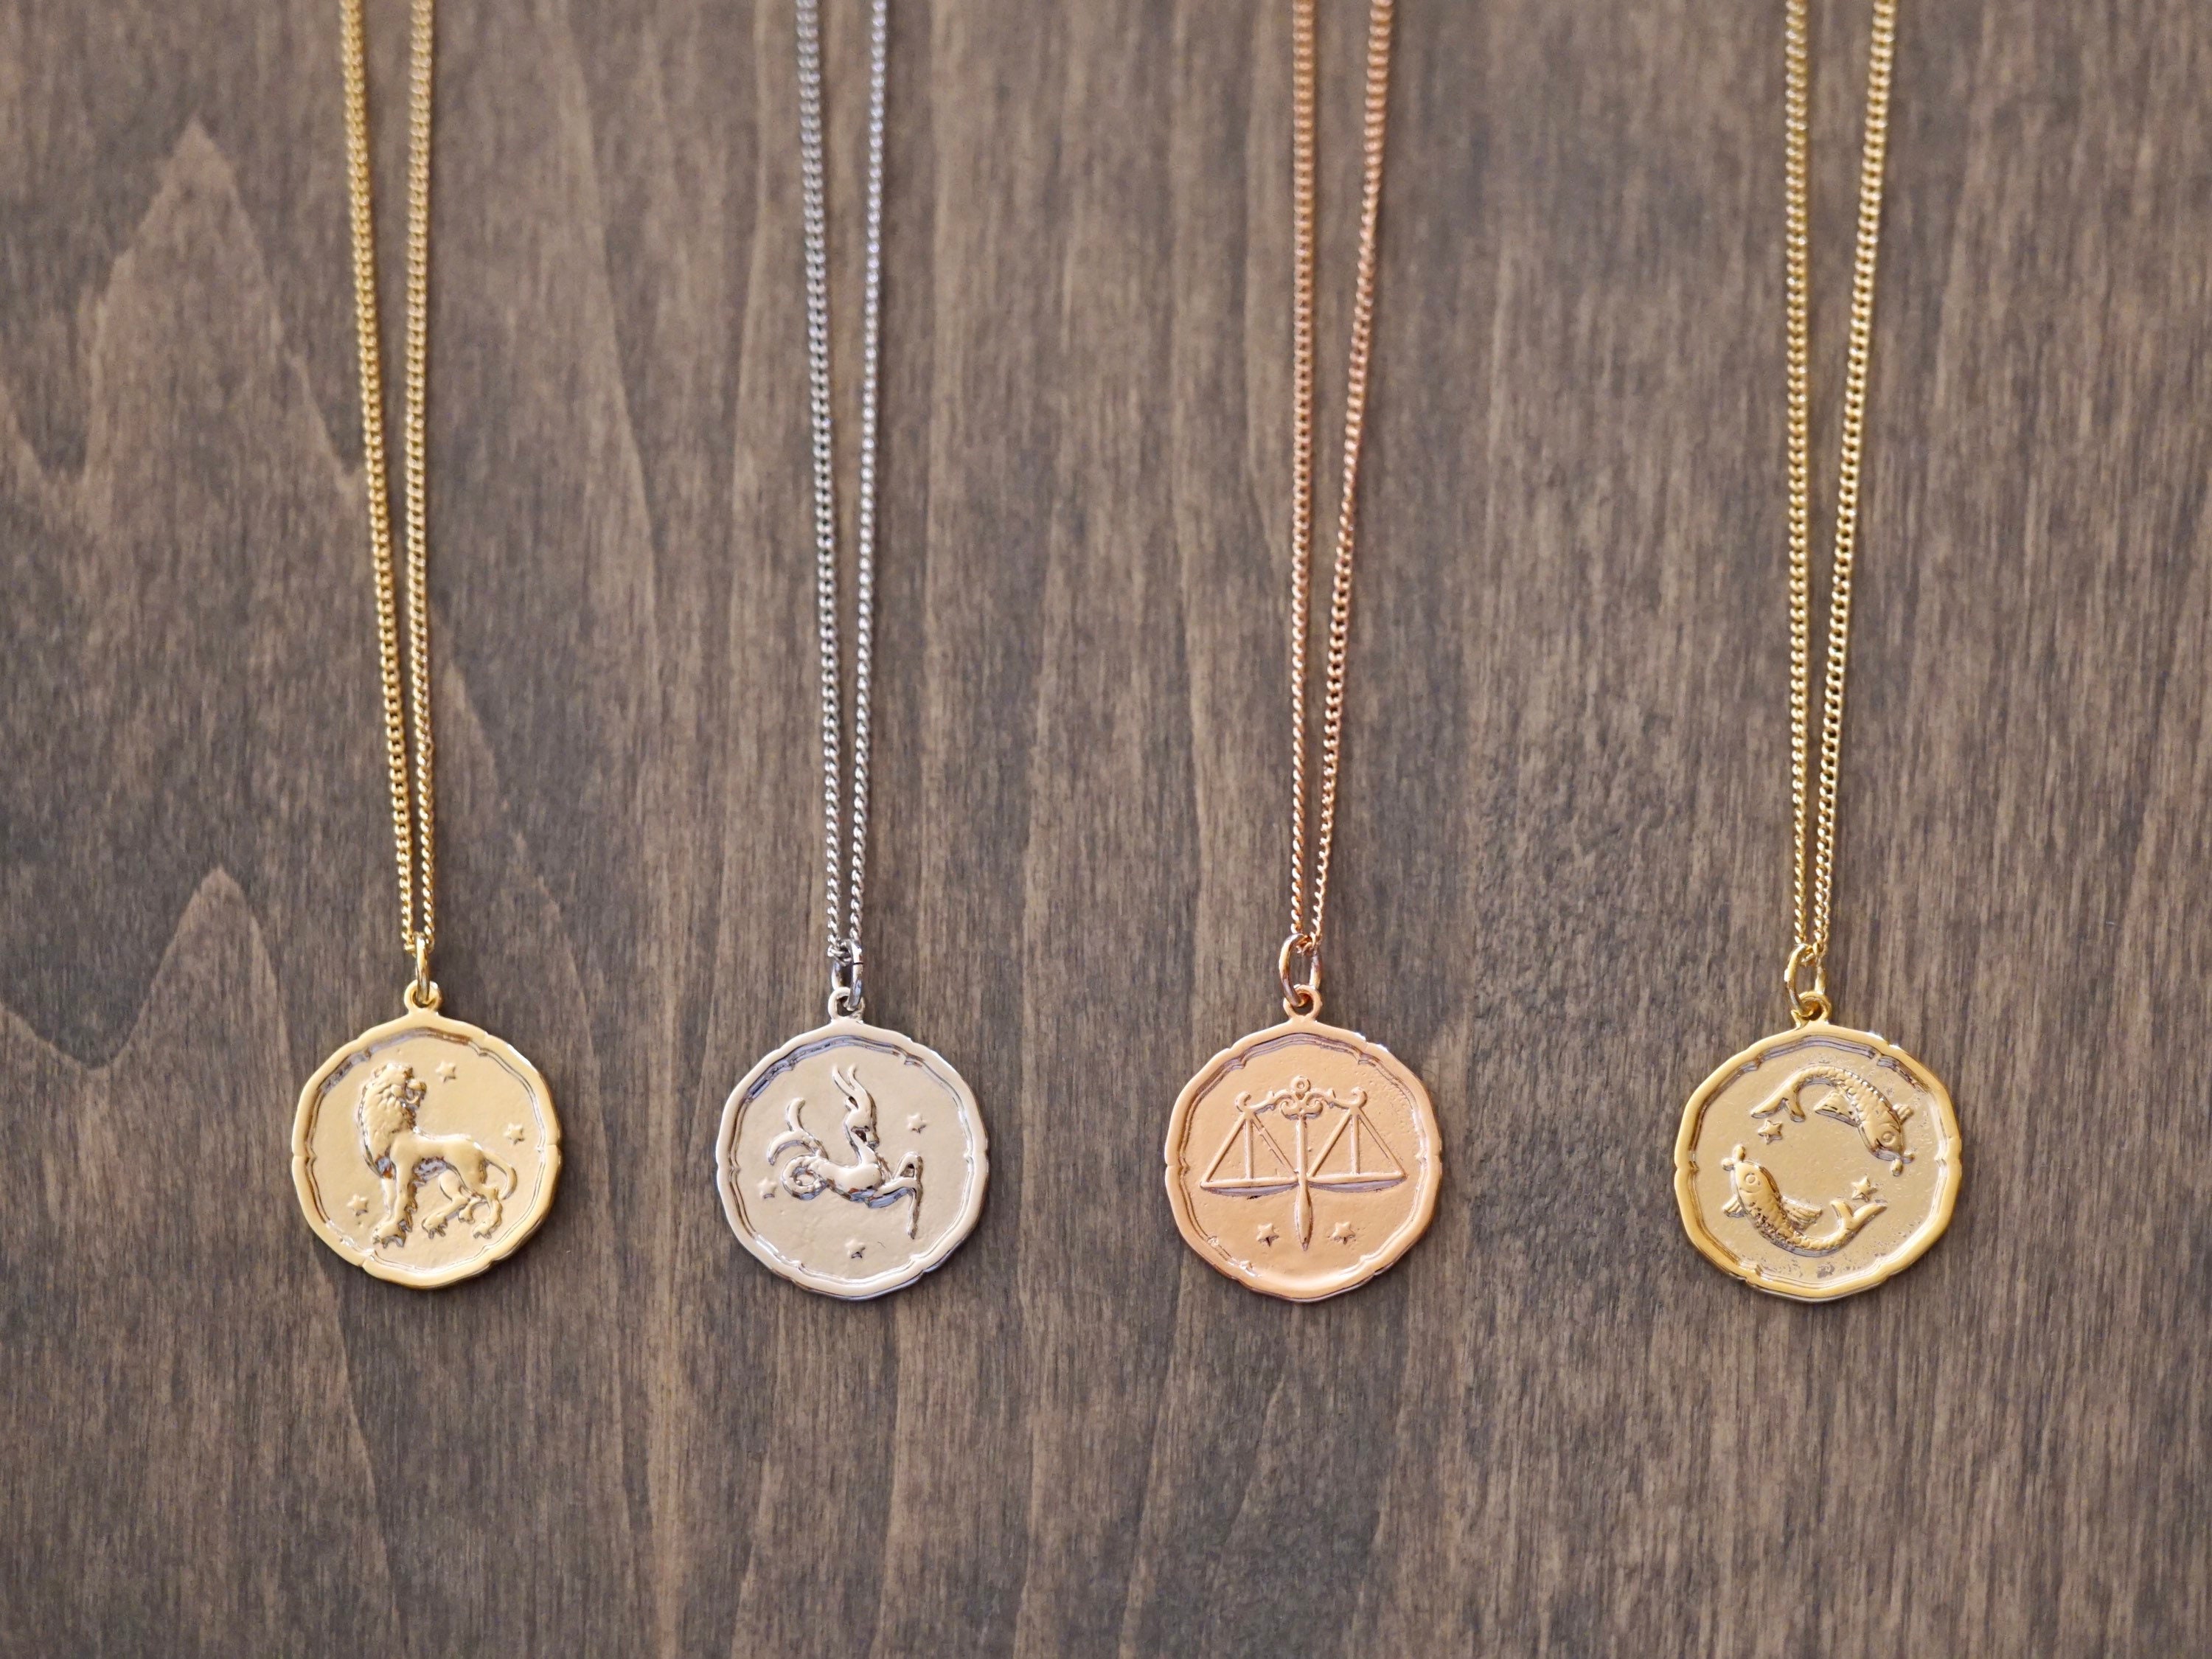 Single Chain Zodiac Coin Necklace in Rose, White, Yellow Gold Plated Brass 3 Sizes, One Chain, 3/4 In. Coin Cute Astrology Birthday Gift